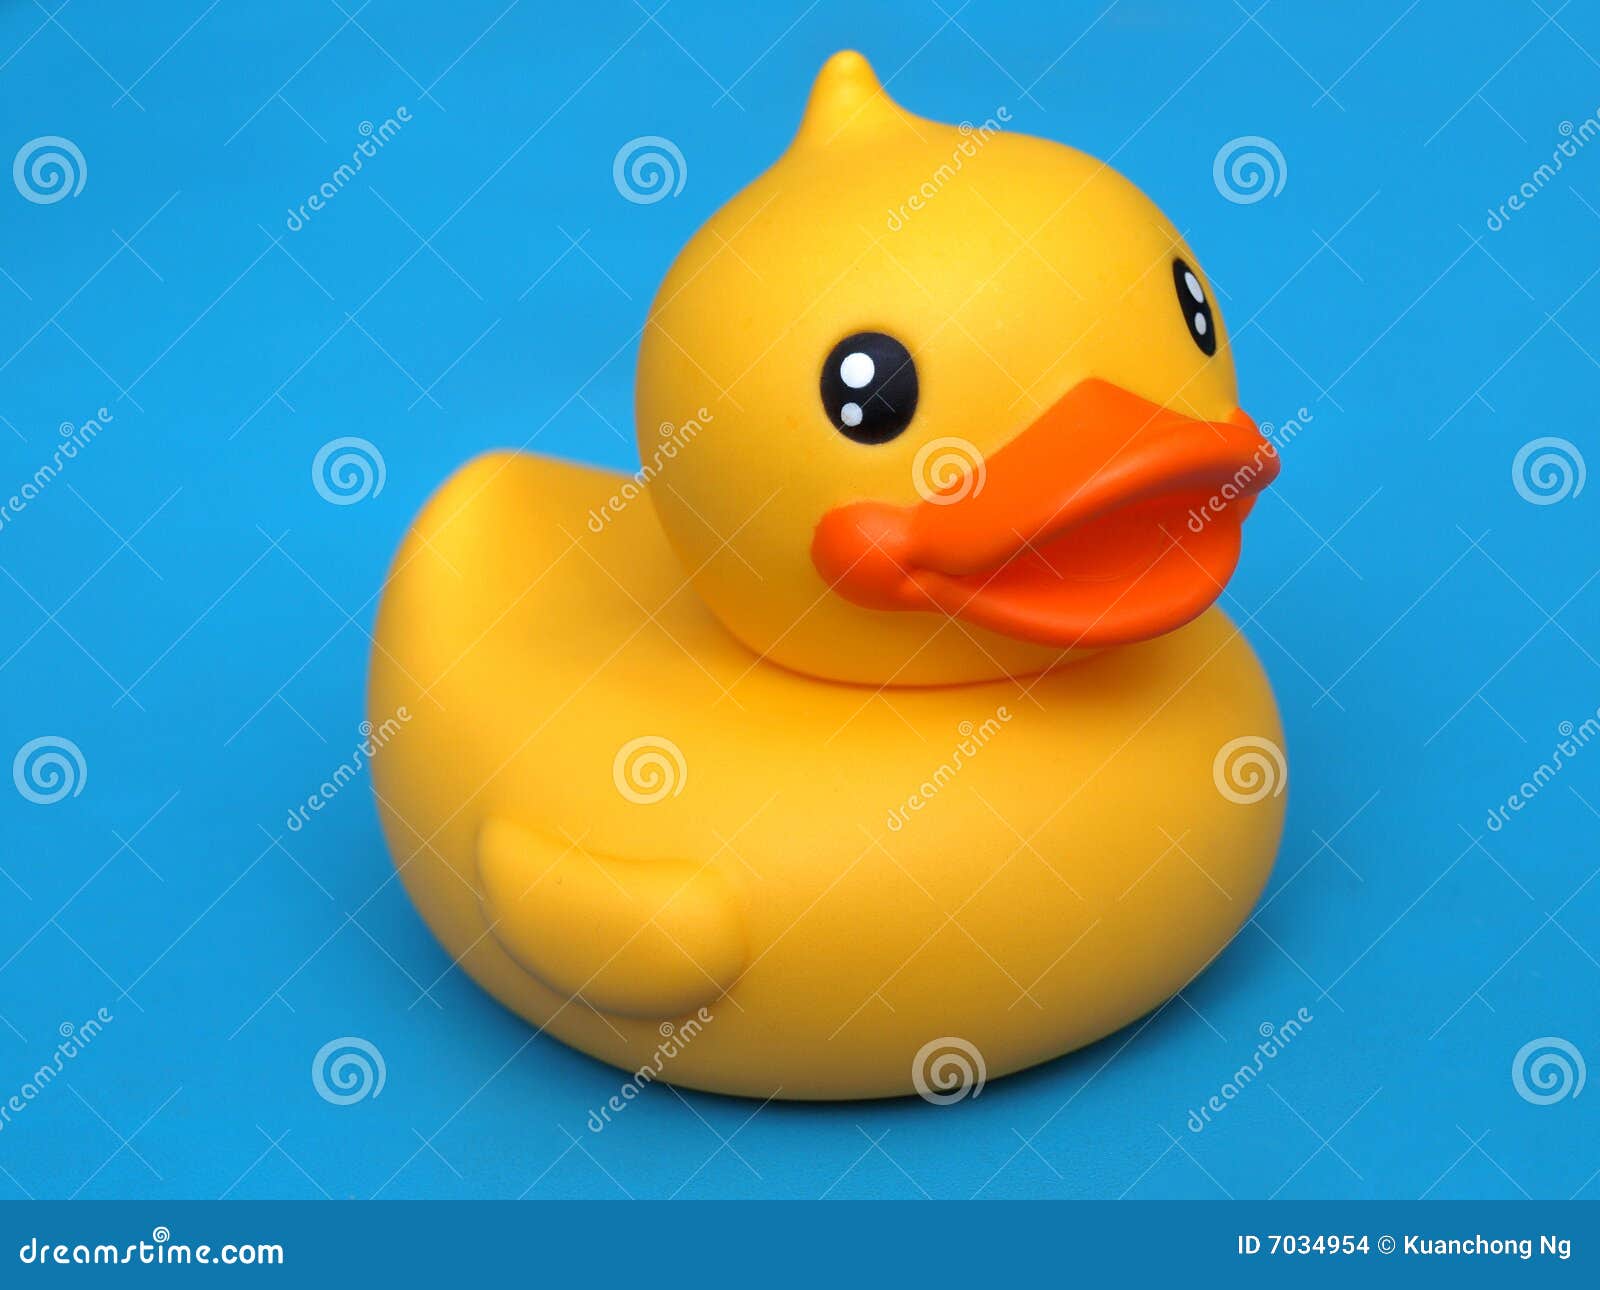 stock images yellow duck image